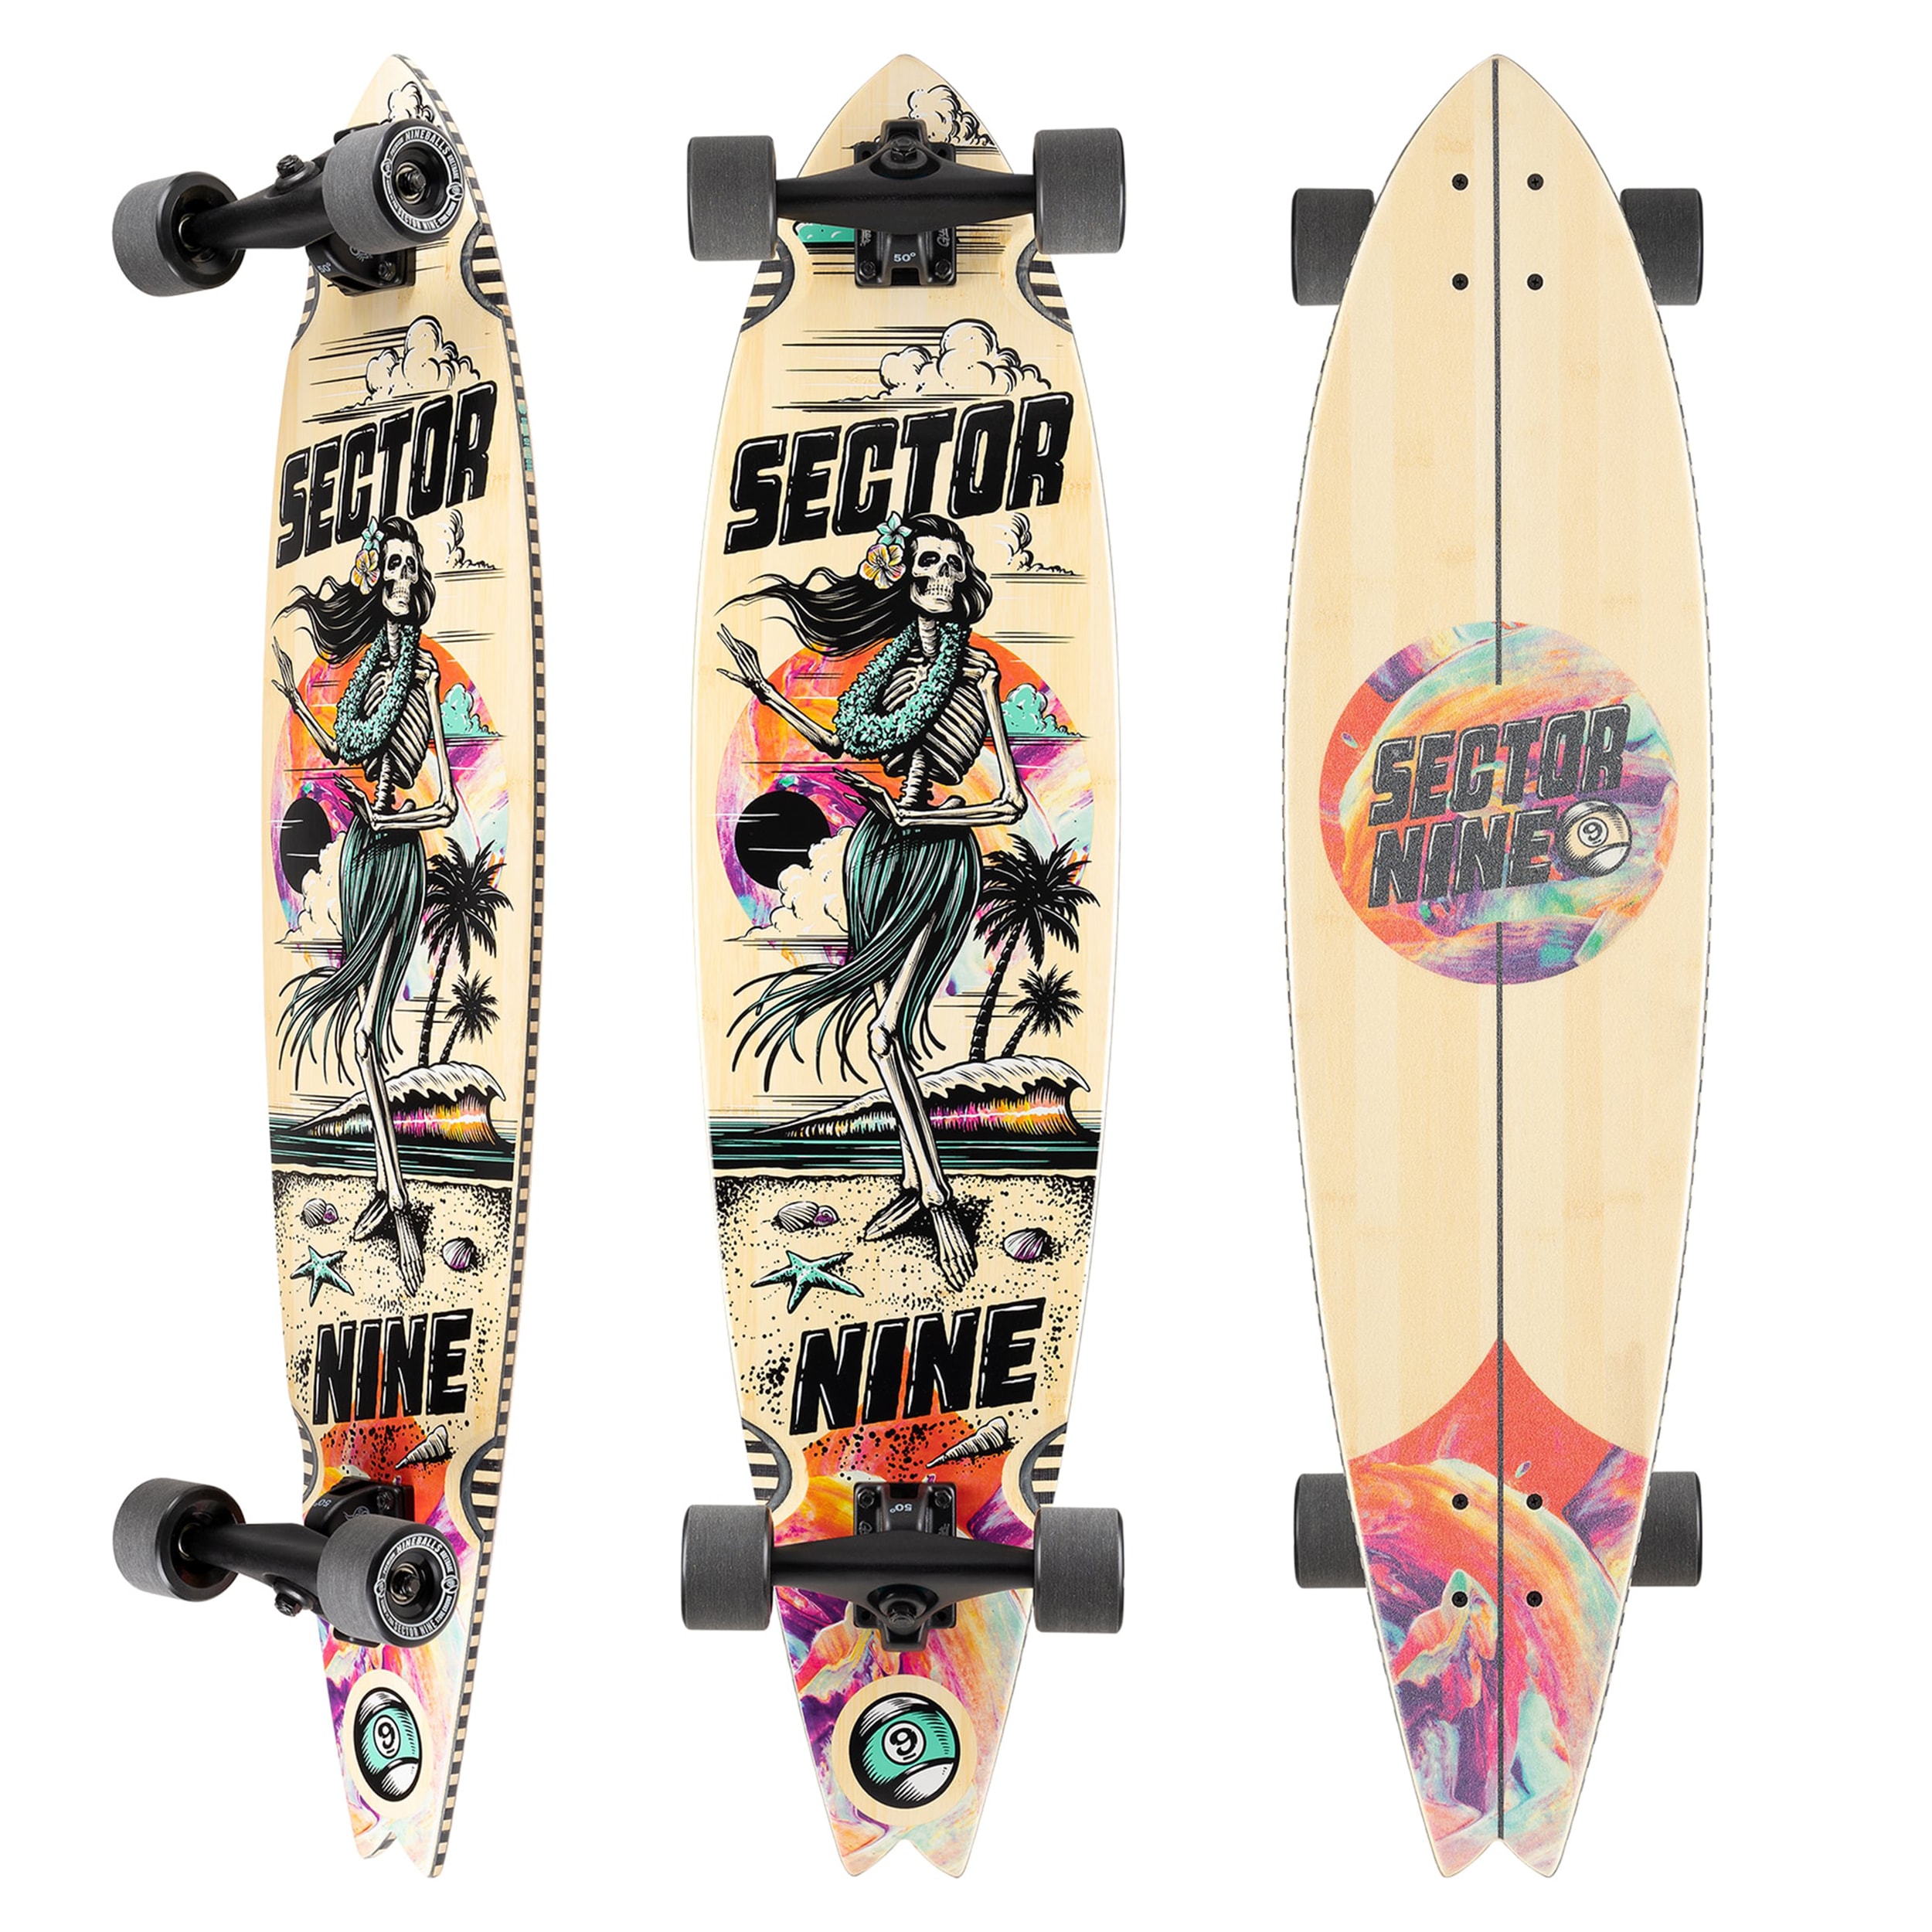 SECTOR 9 OHANA OFFSHORE | FREE RIDE Riding Style